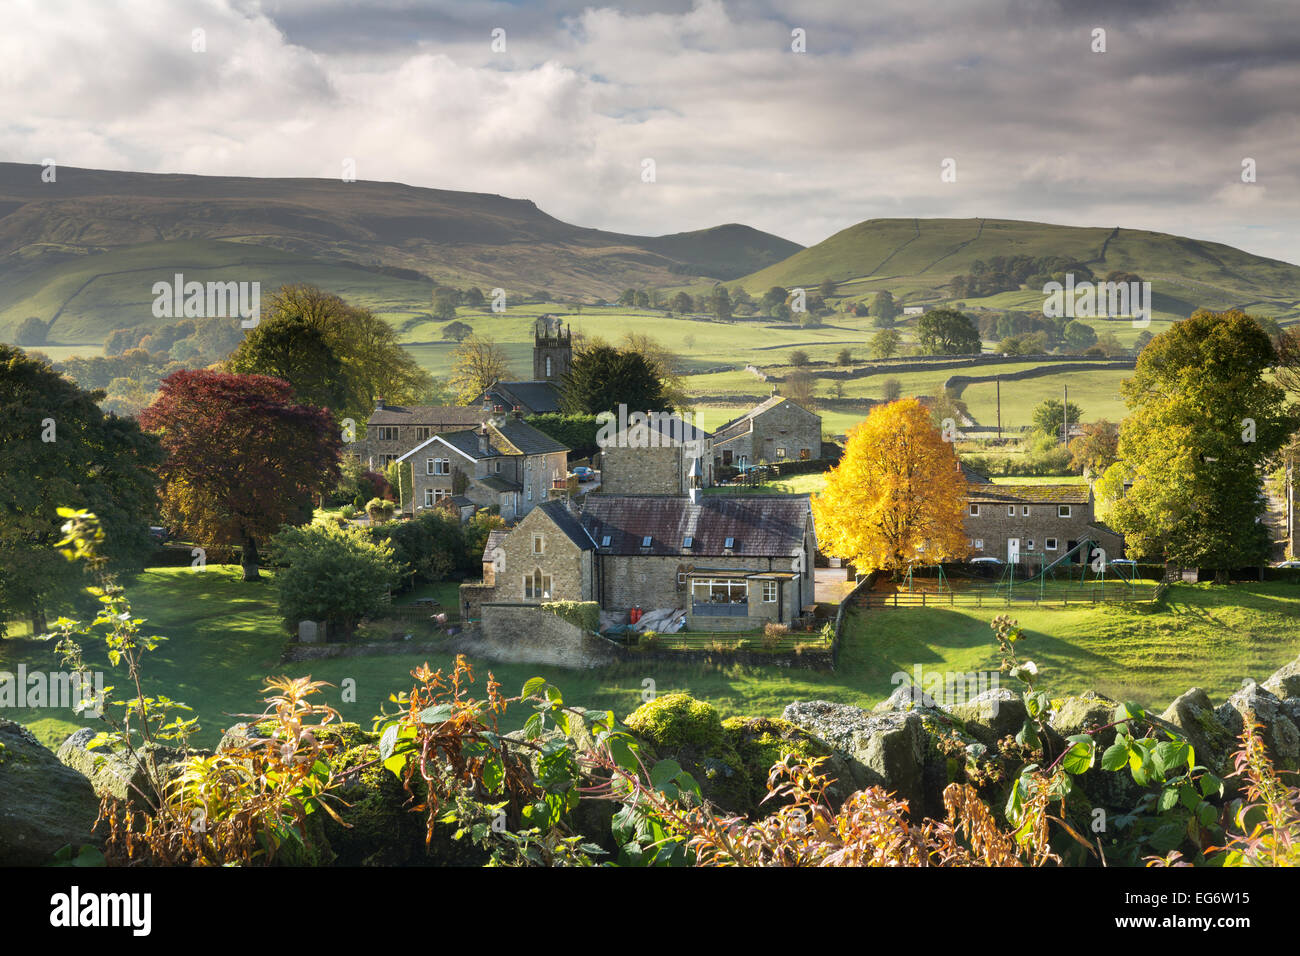 Hebden Dorf Wharfdale in The Yorkshire Dales, England. Stockfoto